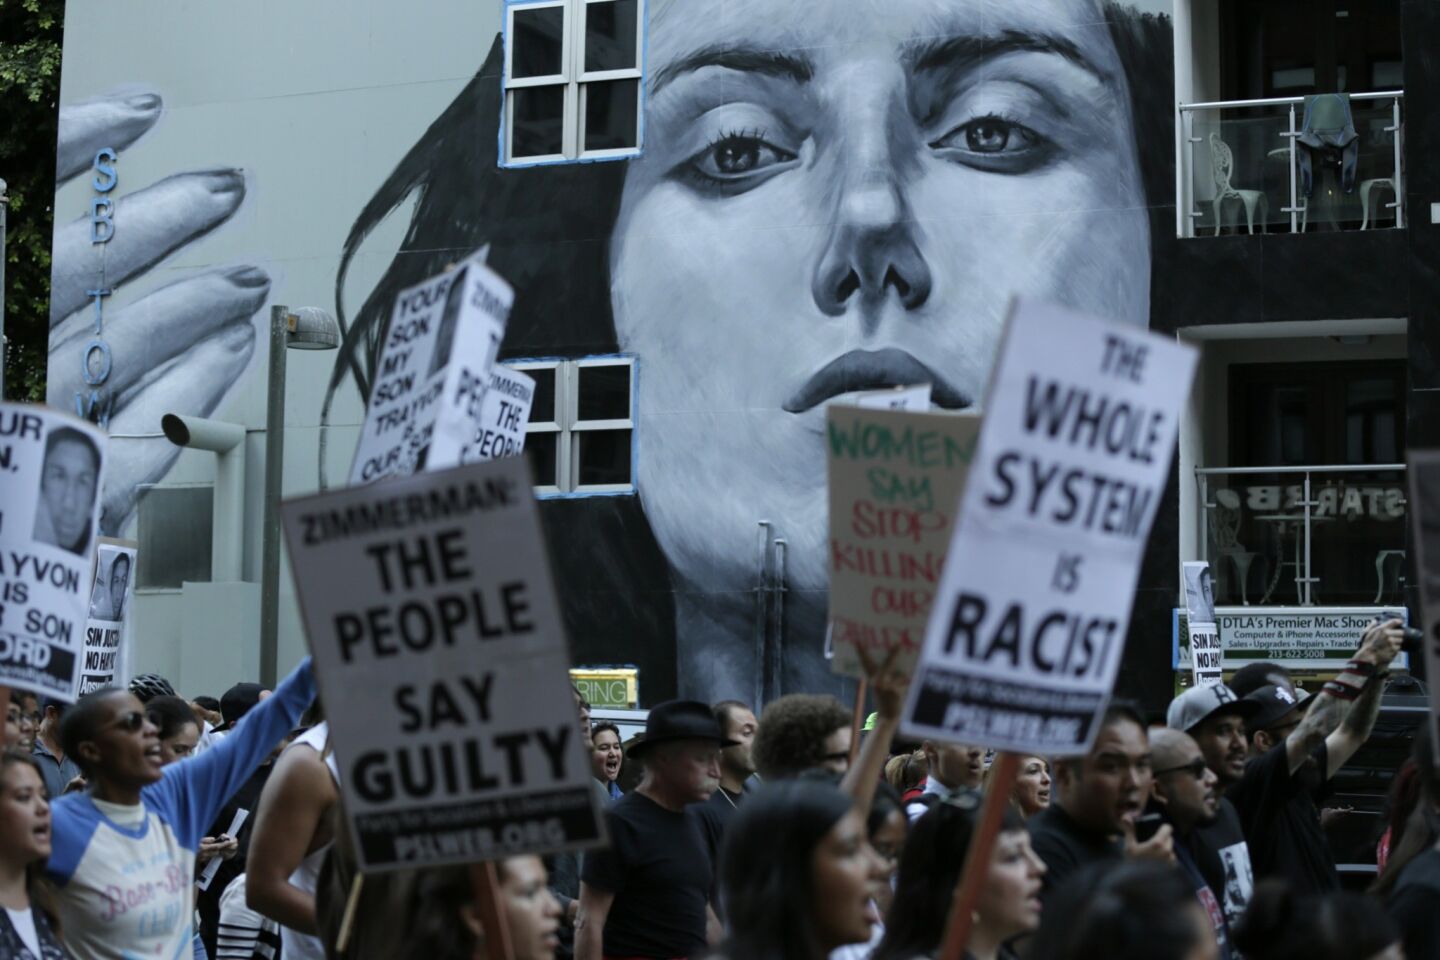 Hundreds march along Spring Street in downtown Los Angeles protesting the not guilty-verdict of George Zimmerman for the murder of Trayvon Martin, holding signs that say "the whole system is racist."